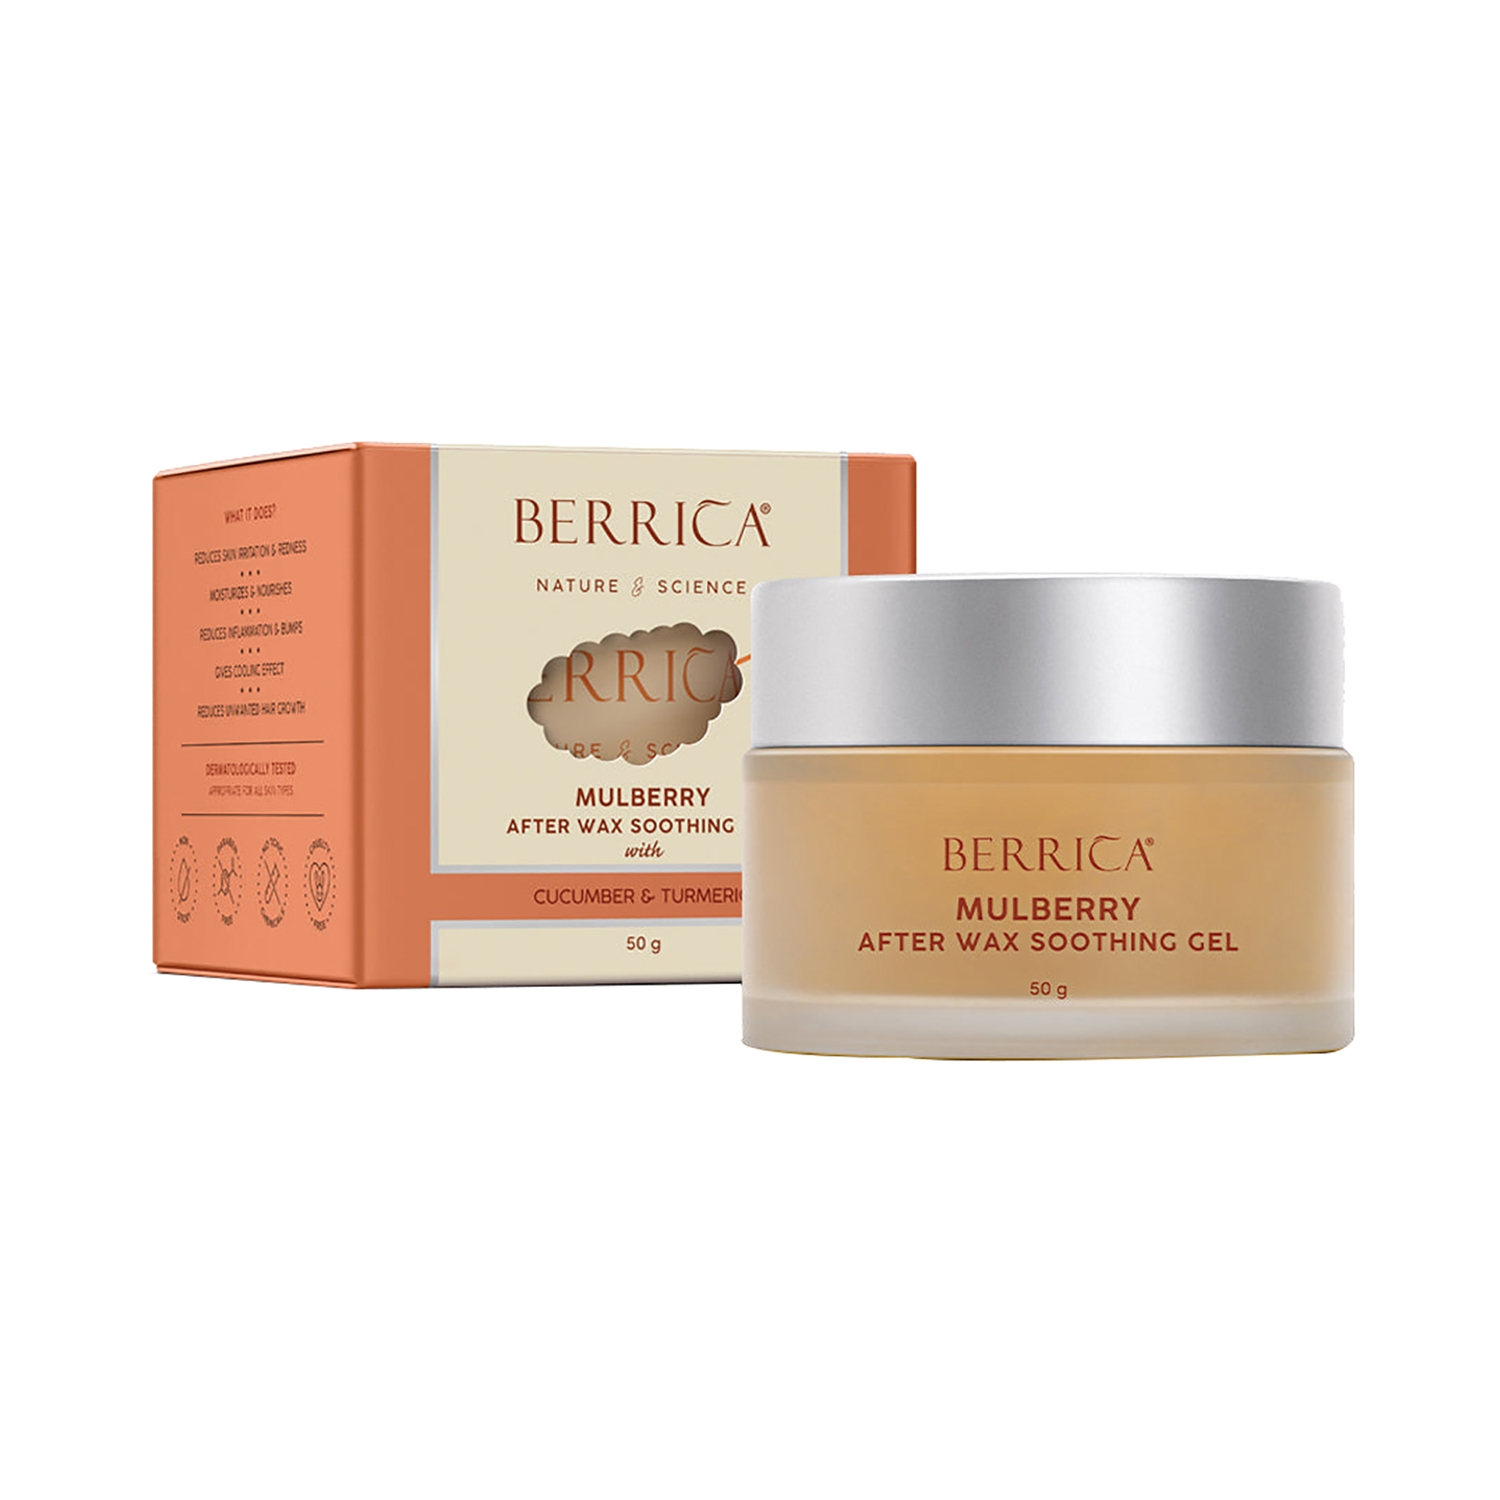 Berrica | Berrica Mulberry After Wax Soothing Gel (50g)